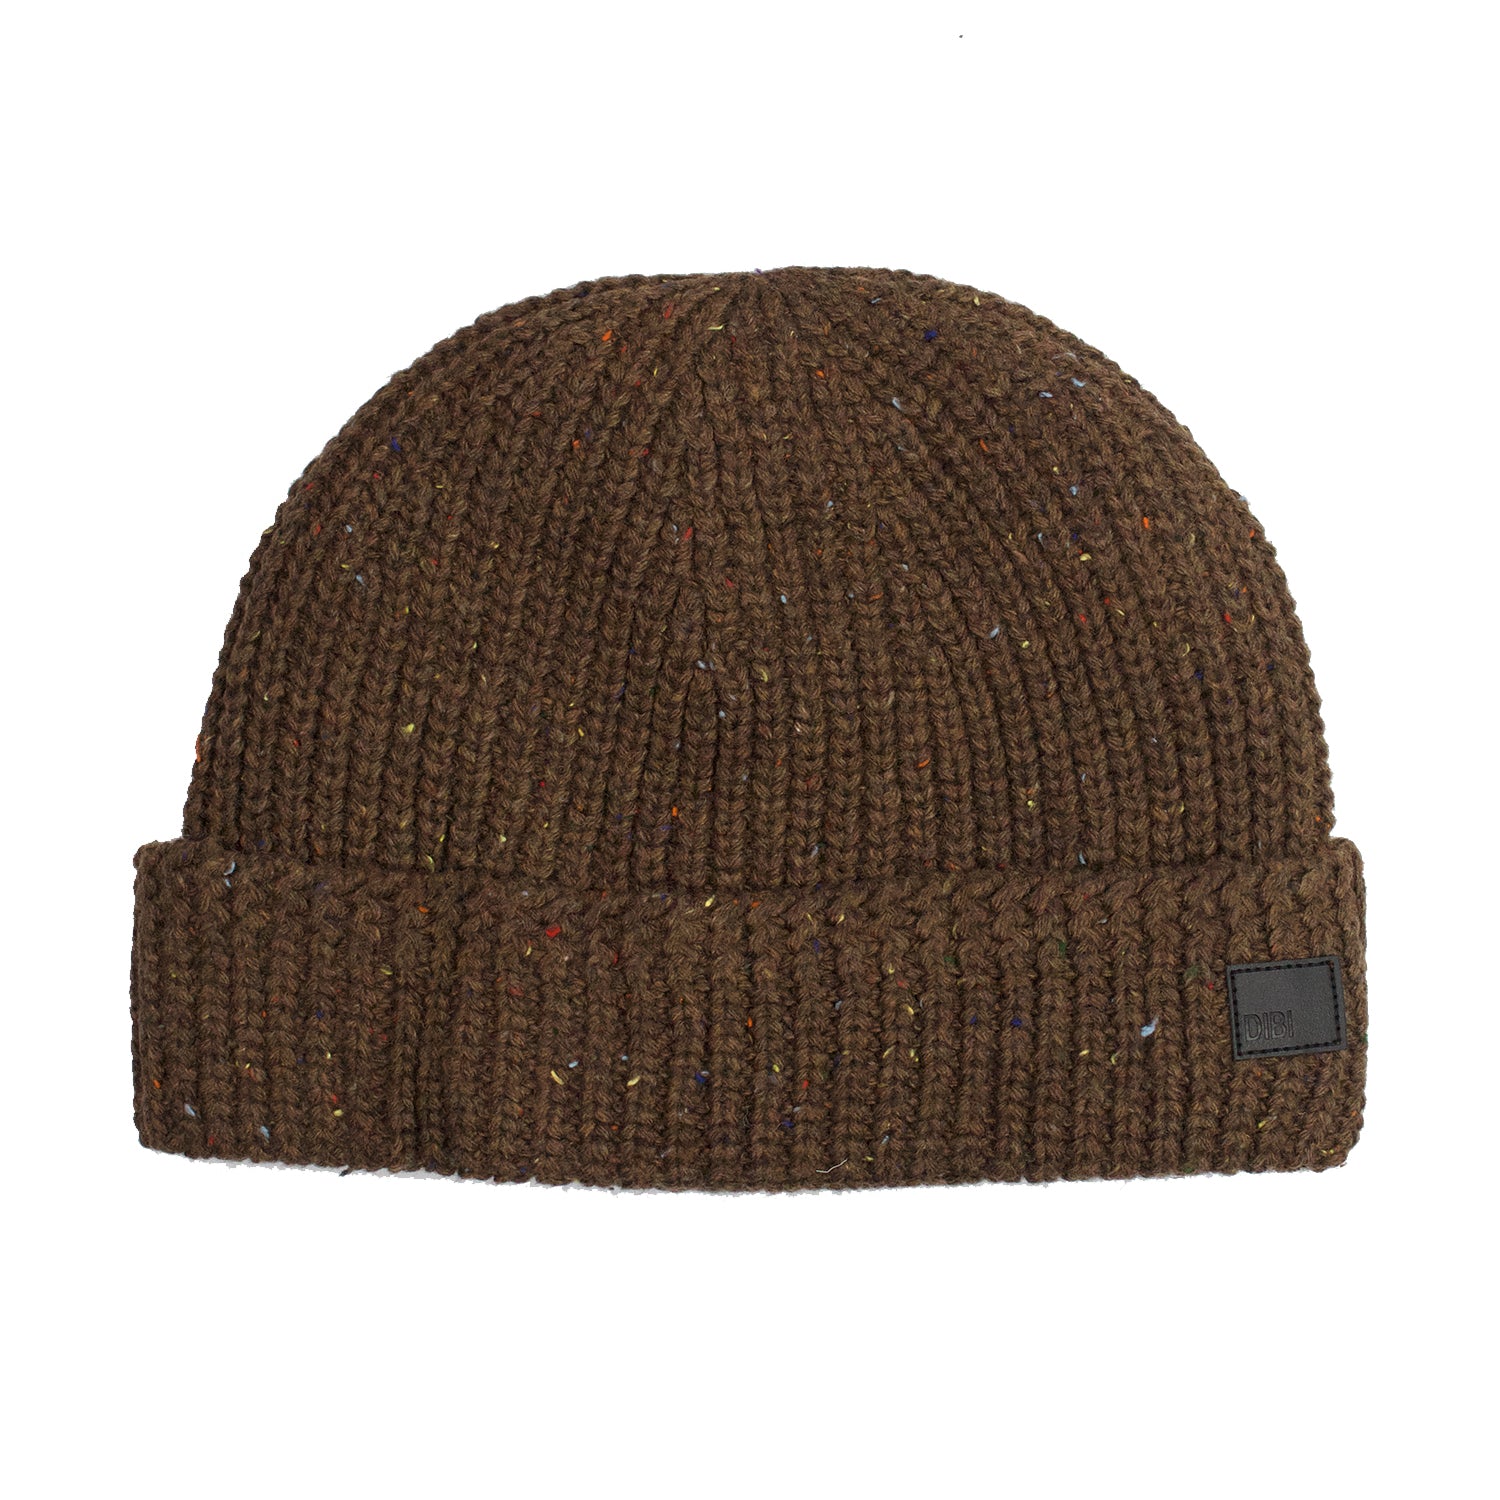 Faux Fur Lined Brown Donegal Beanie from DIBI